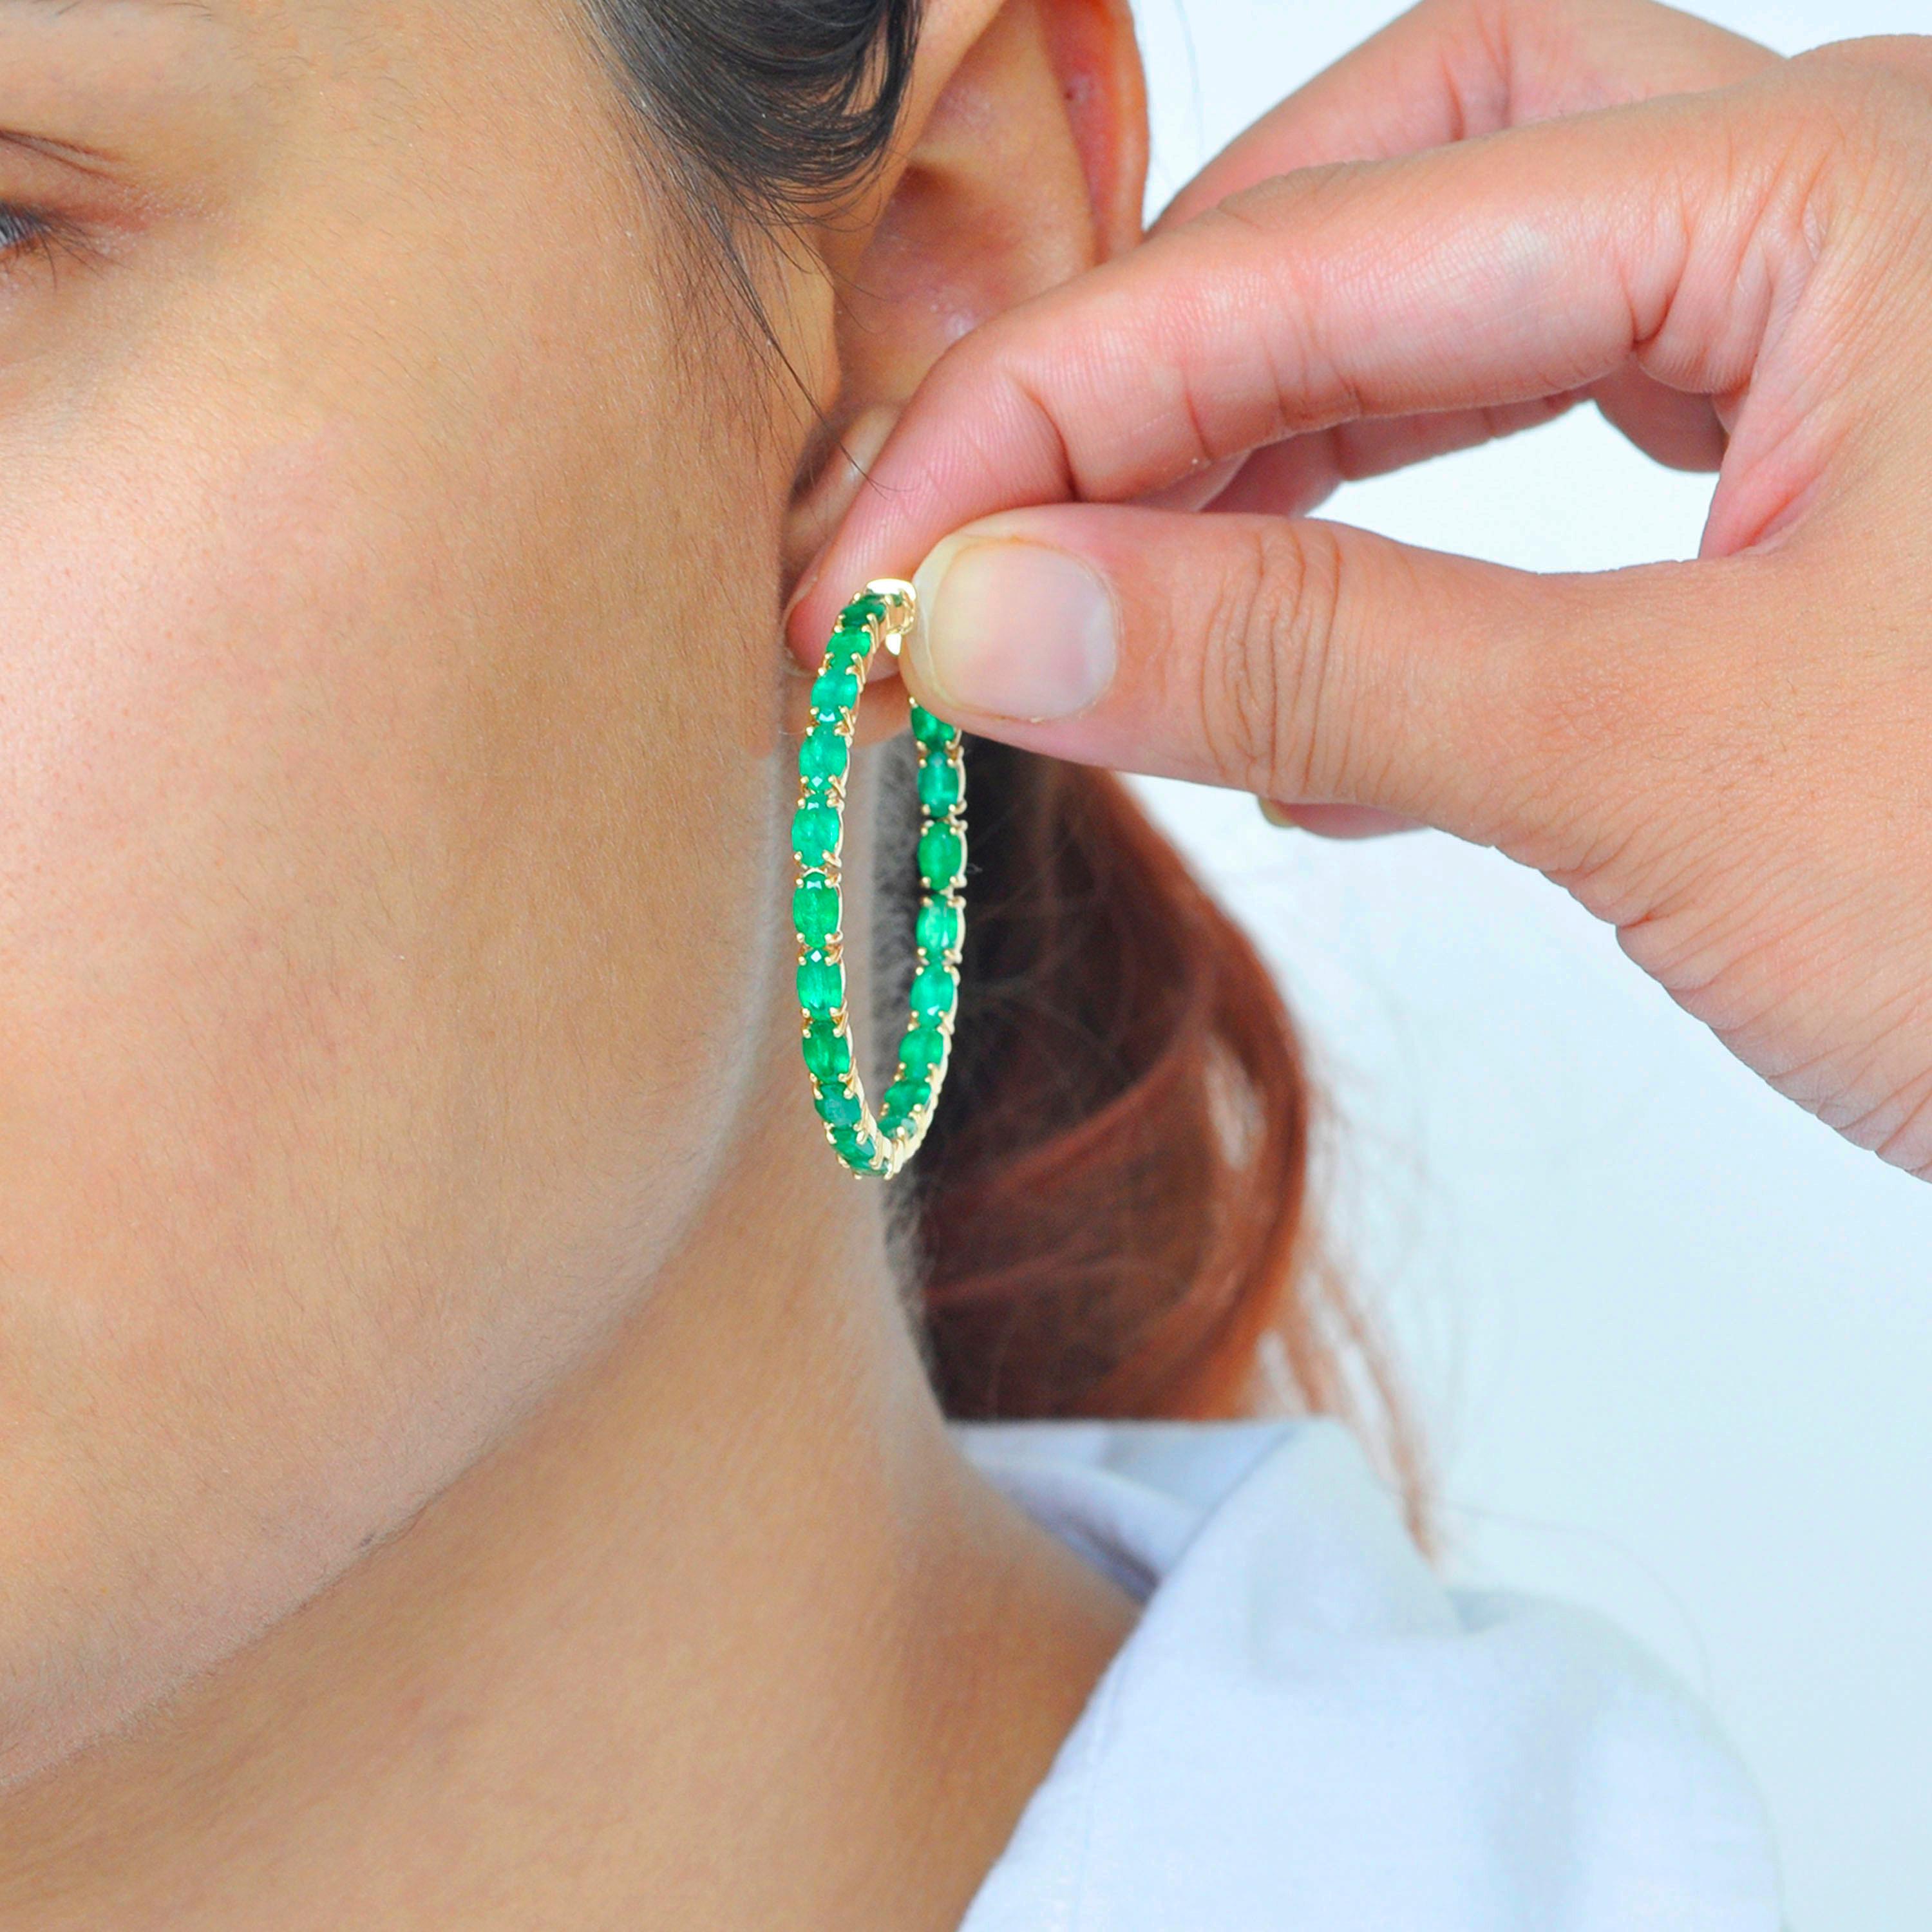 18 karat yellow gold 8.62 carats oval brazilian emeralds hoop earrings. 

This enchanting lush green brazilian emeralds full hoop earring is impressive. The hoop is created with 40 perfect matching oval cut emeralds of size 5x3 mm each. The emeralds